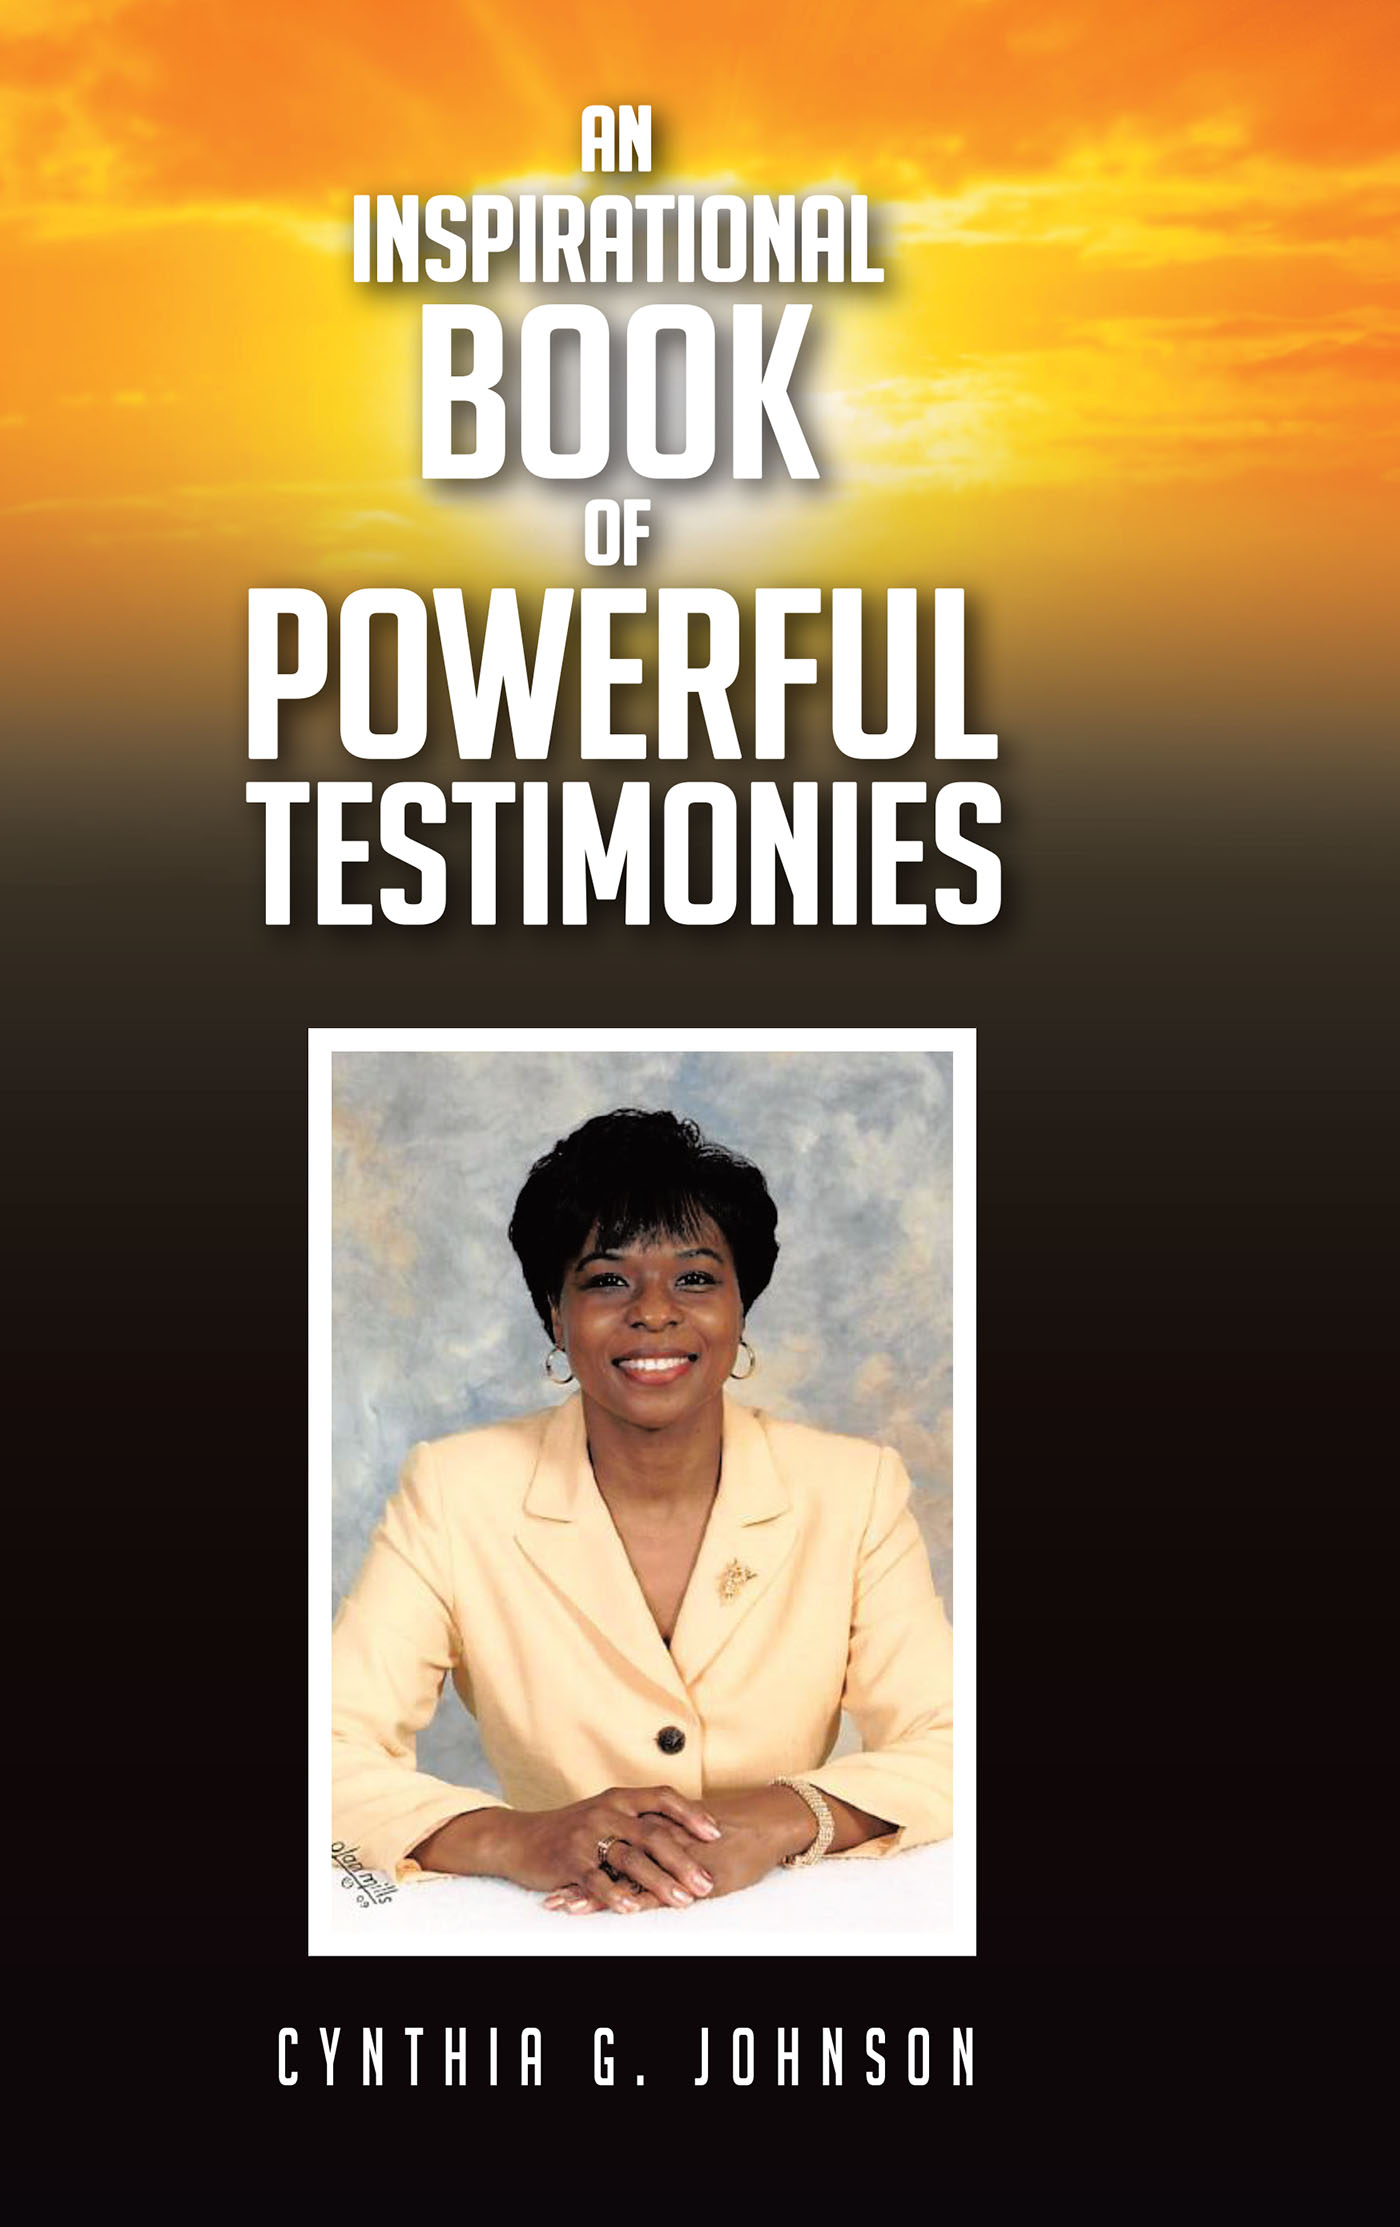 Cynthia G. Johnson’s Newly Released "An Inspirational Book of Powerful Testimonies" is an Inspiring Collection of Personal Experiences with Divine Intervention